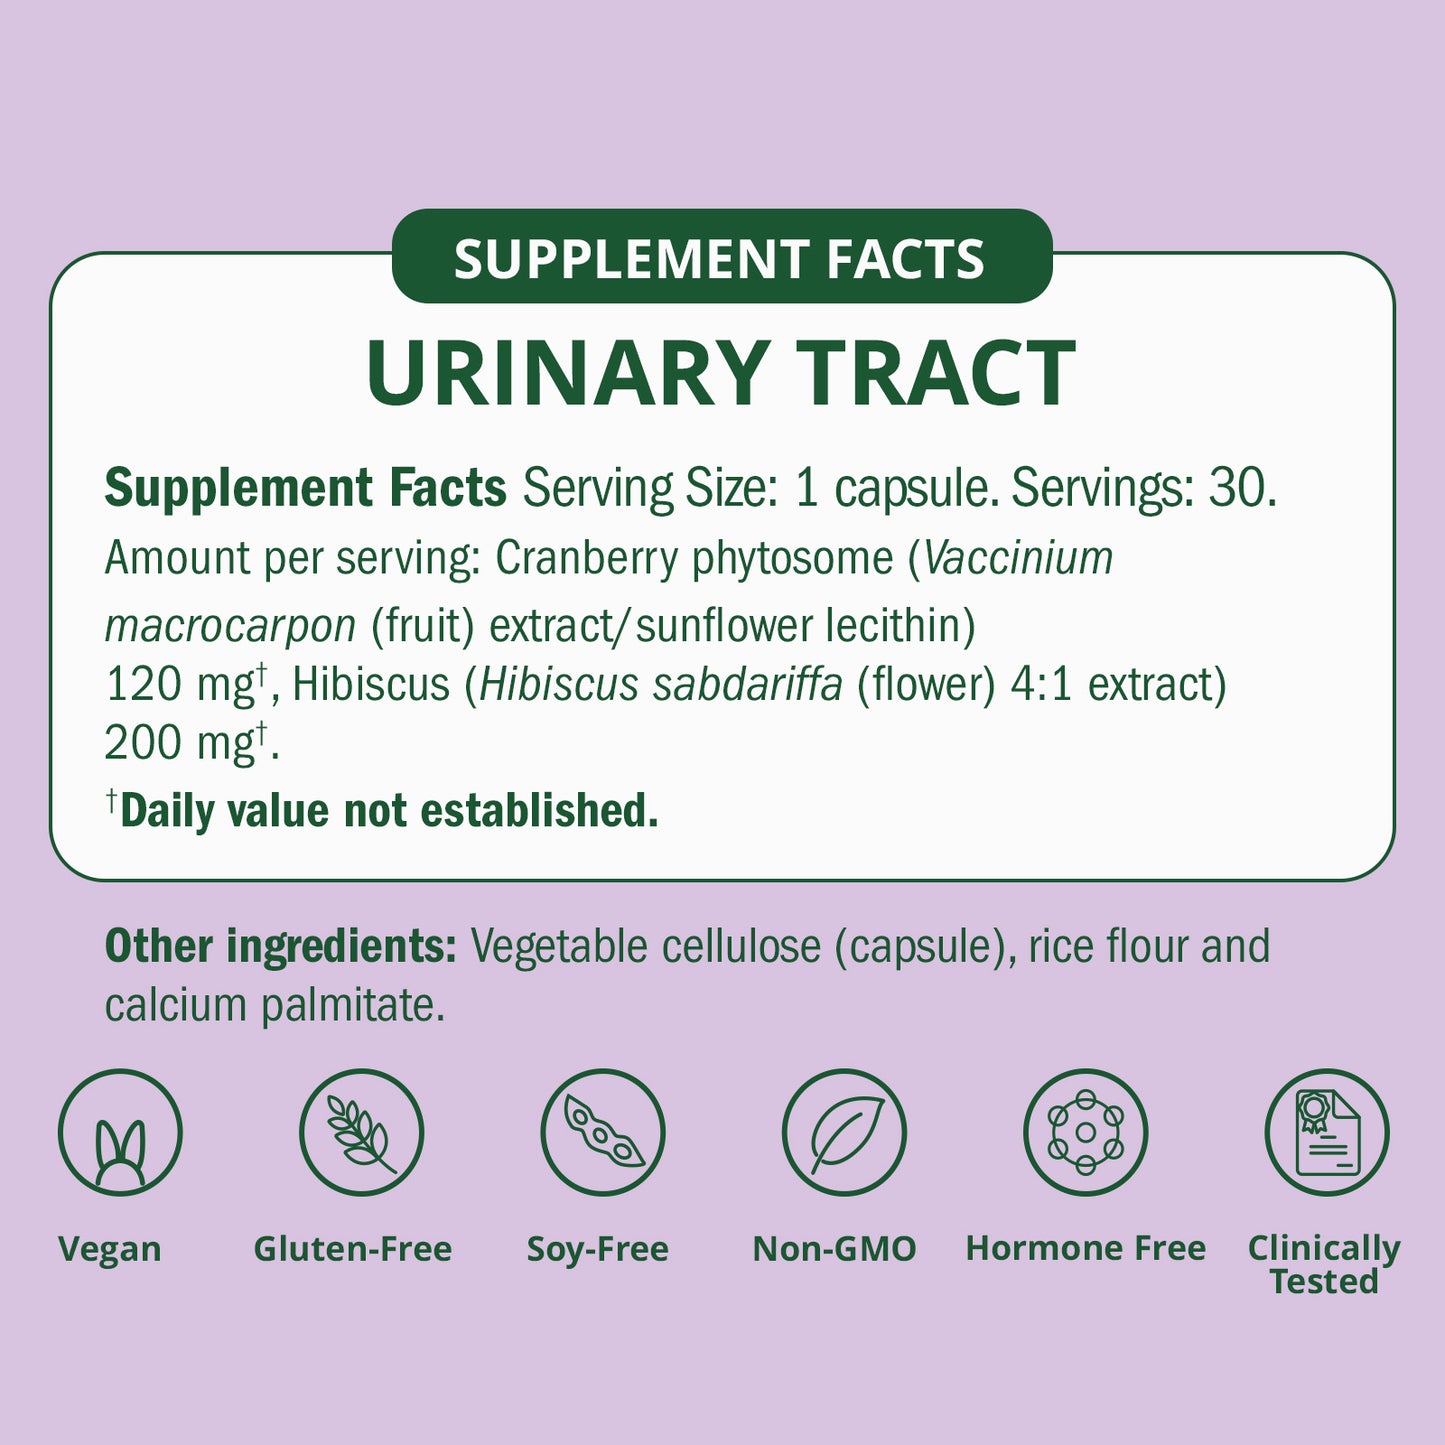 Urinary Tract Cleanse & Protect